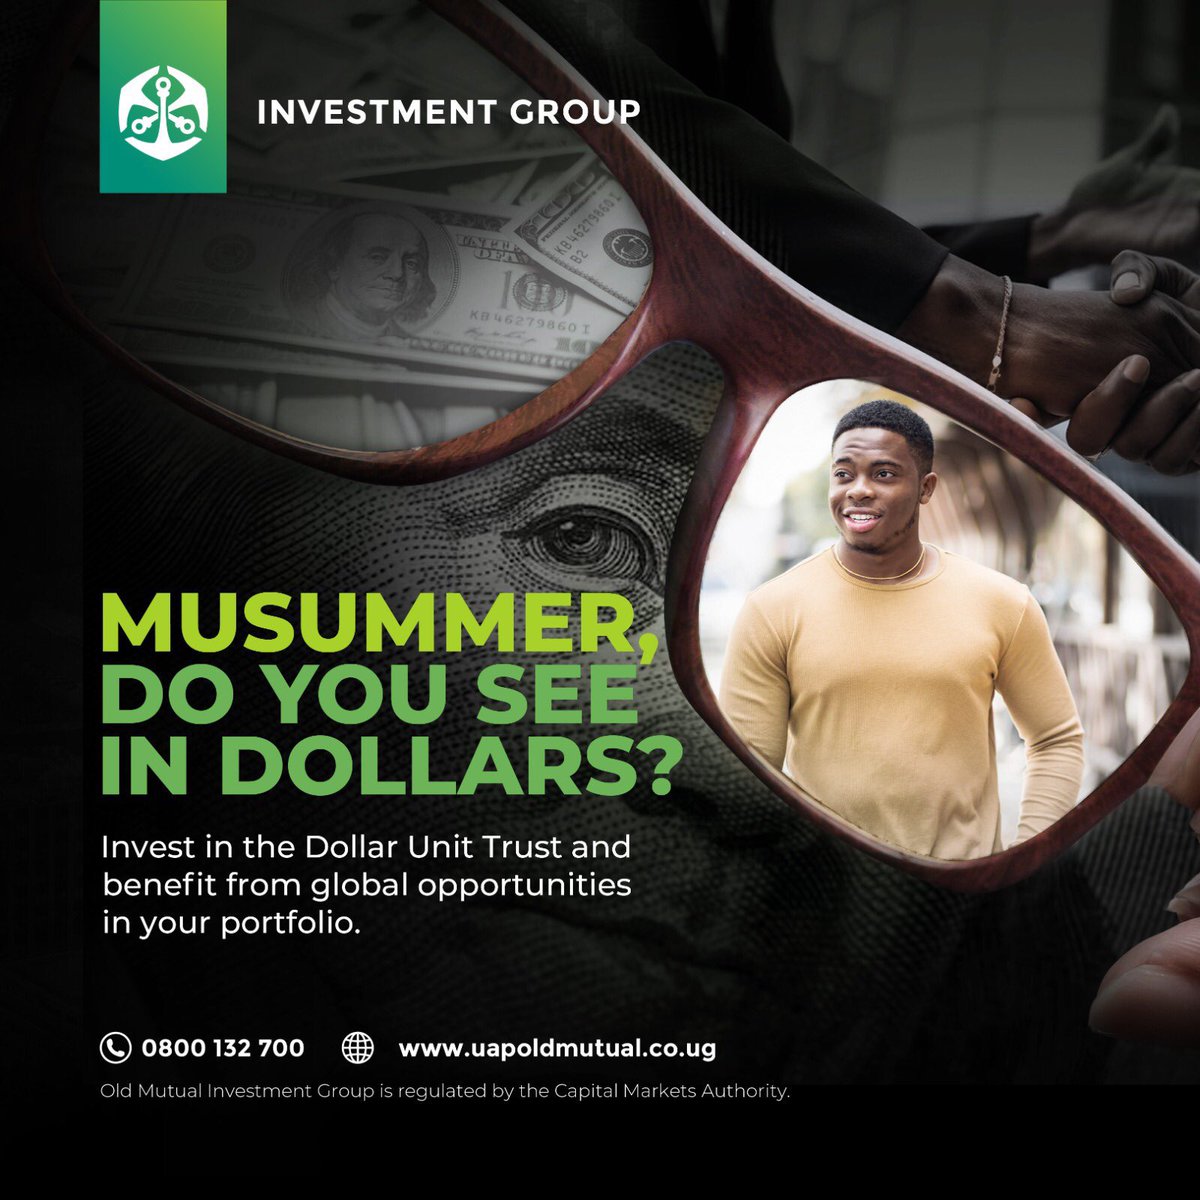 Musummer, don’t let relatives eat your ka money back home. Invest with @UAPOldMutualUg today and watch your money multiply every single day. #DollarTrustUnit #TutambuleFfena